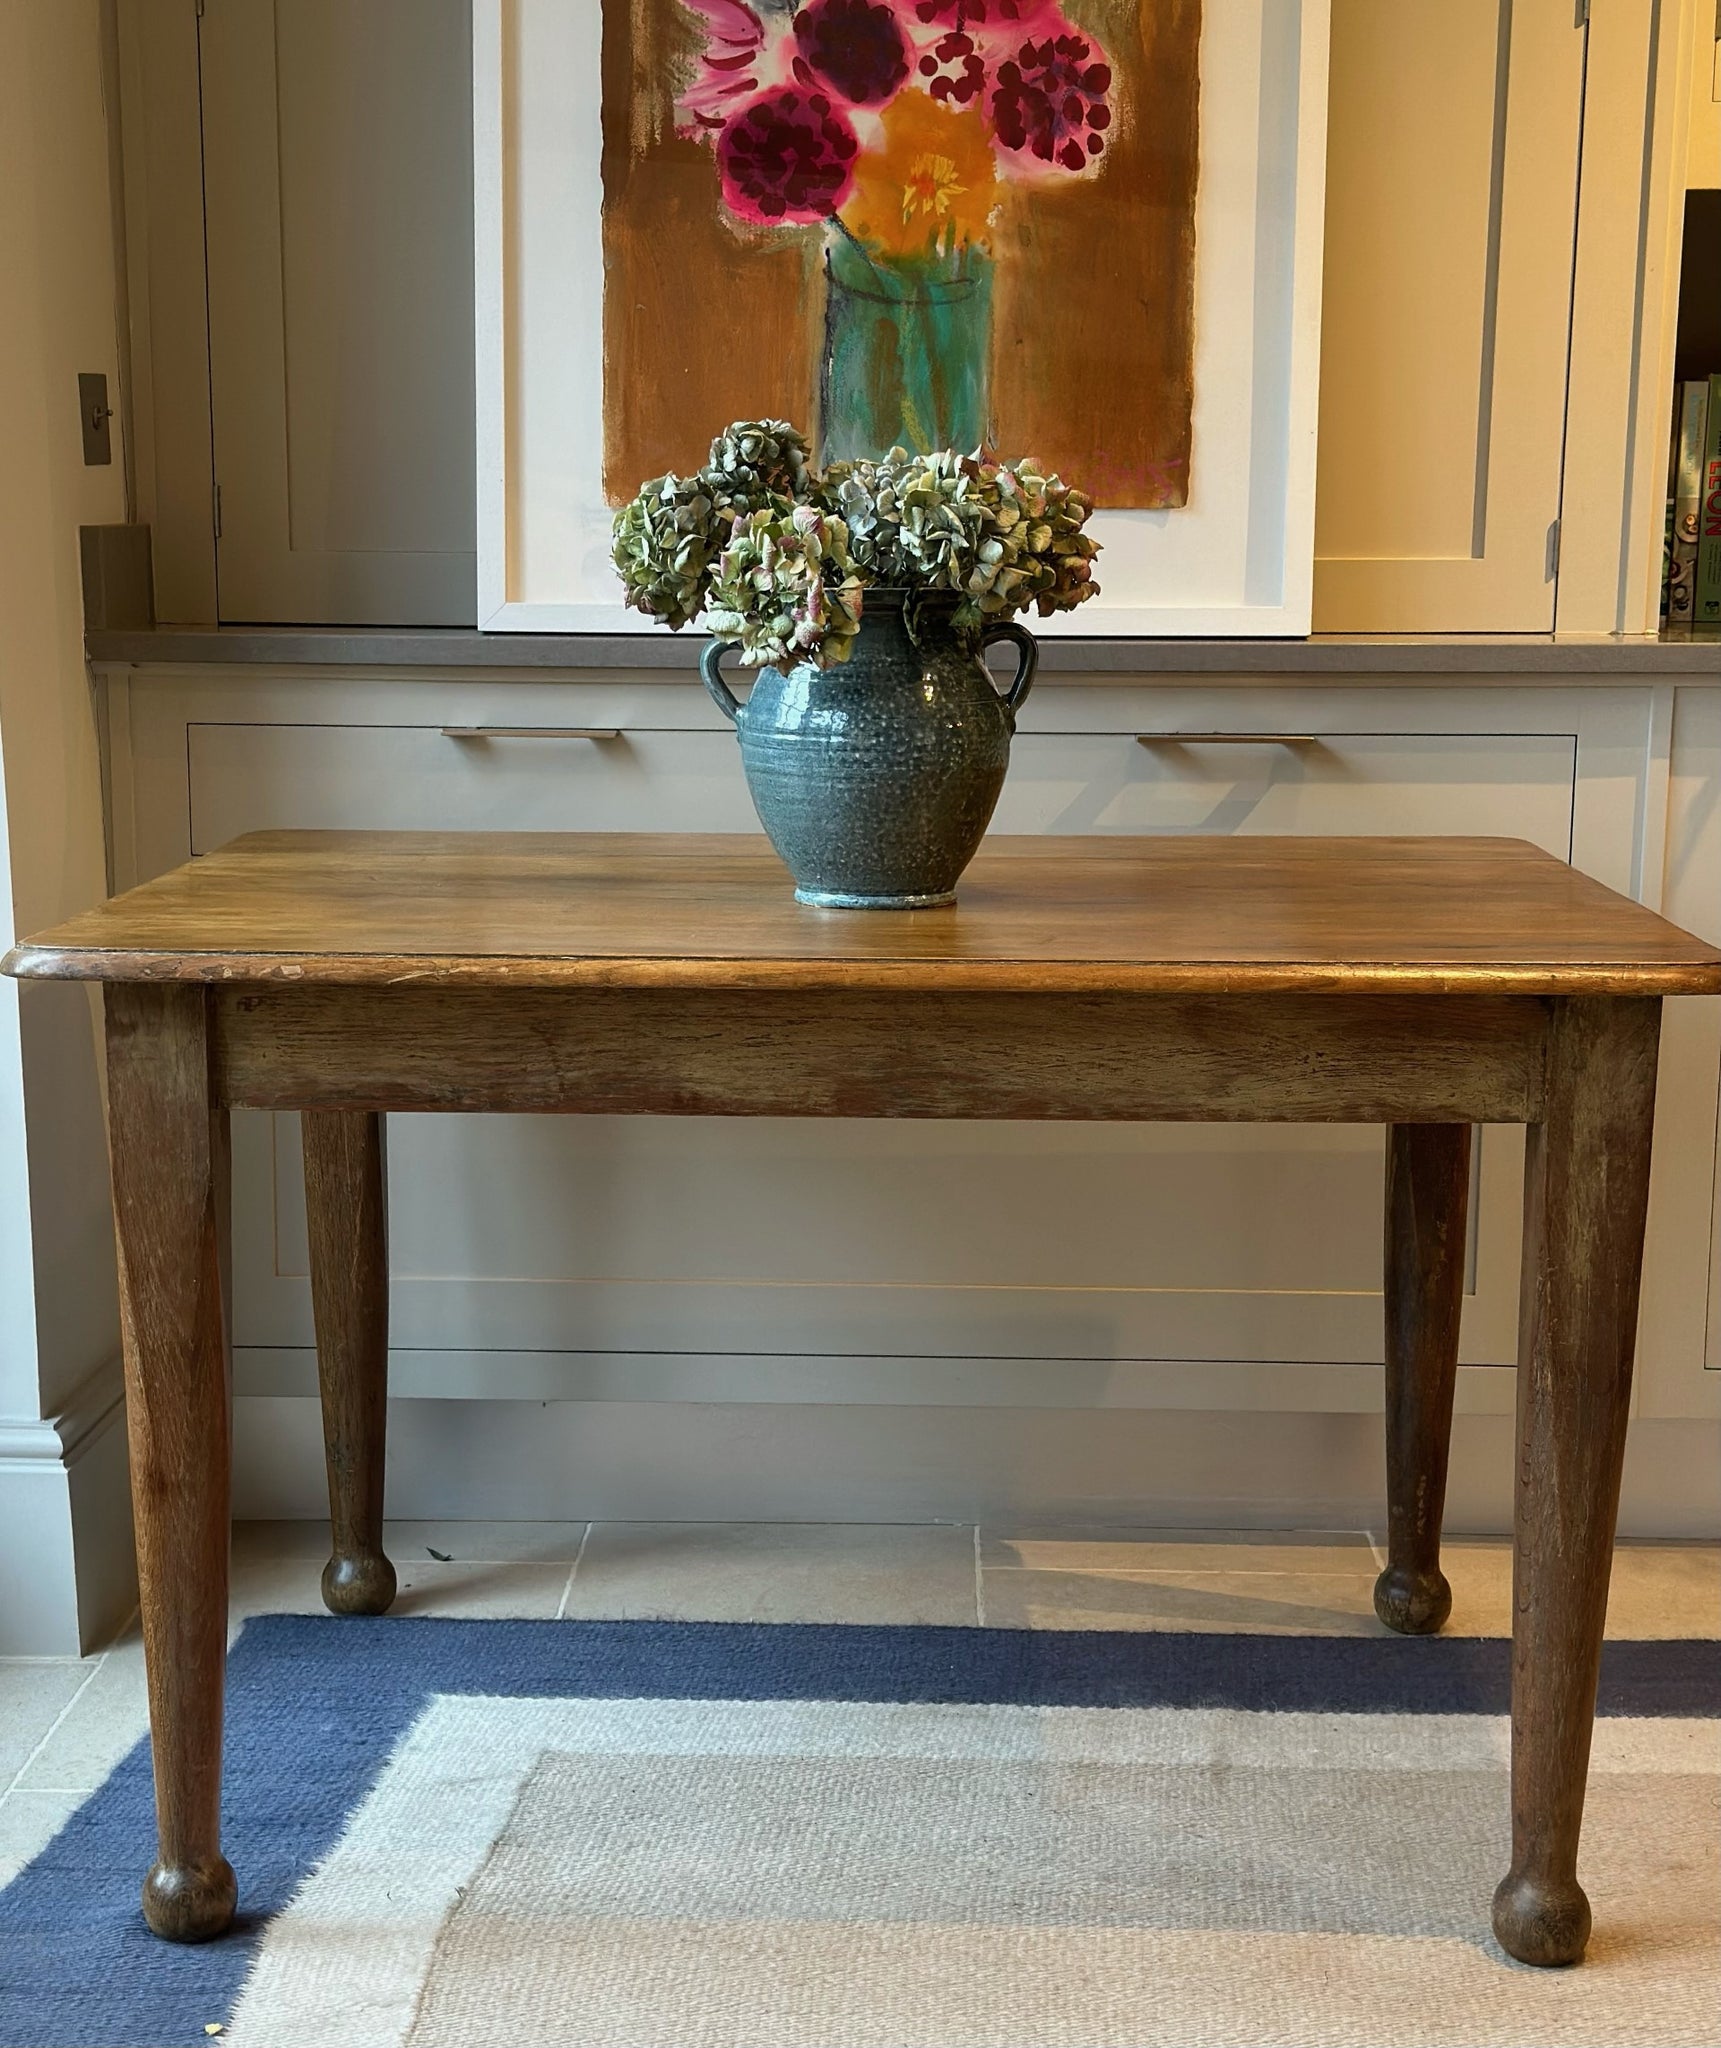 Honeyed Oak Top Table with Tapered Legs and Ball Feet